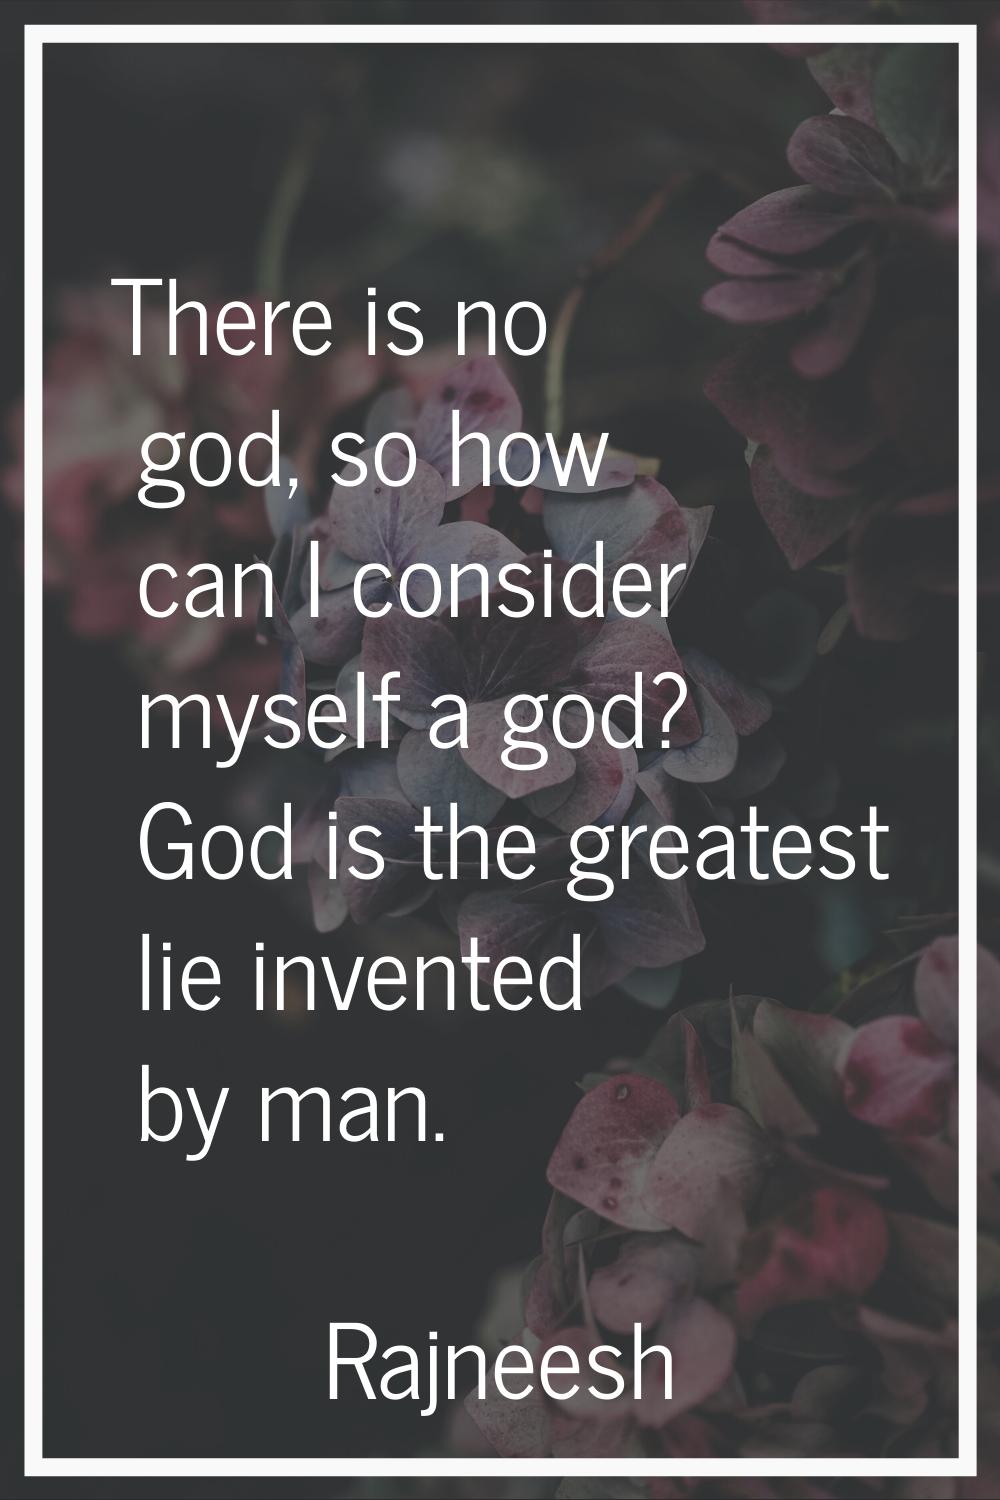 There is no god, so how can I consider myself a god? God is the greatest lie invented by man.